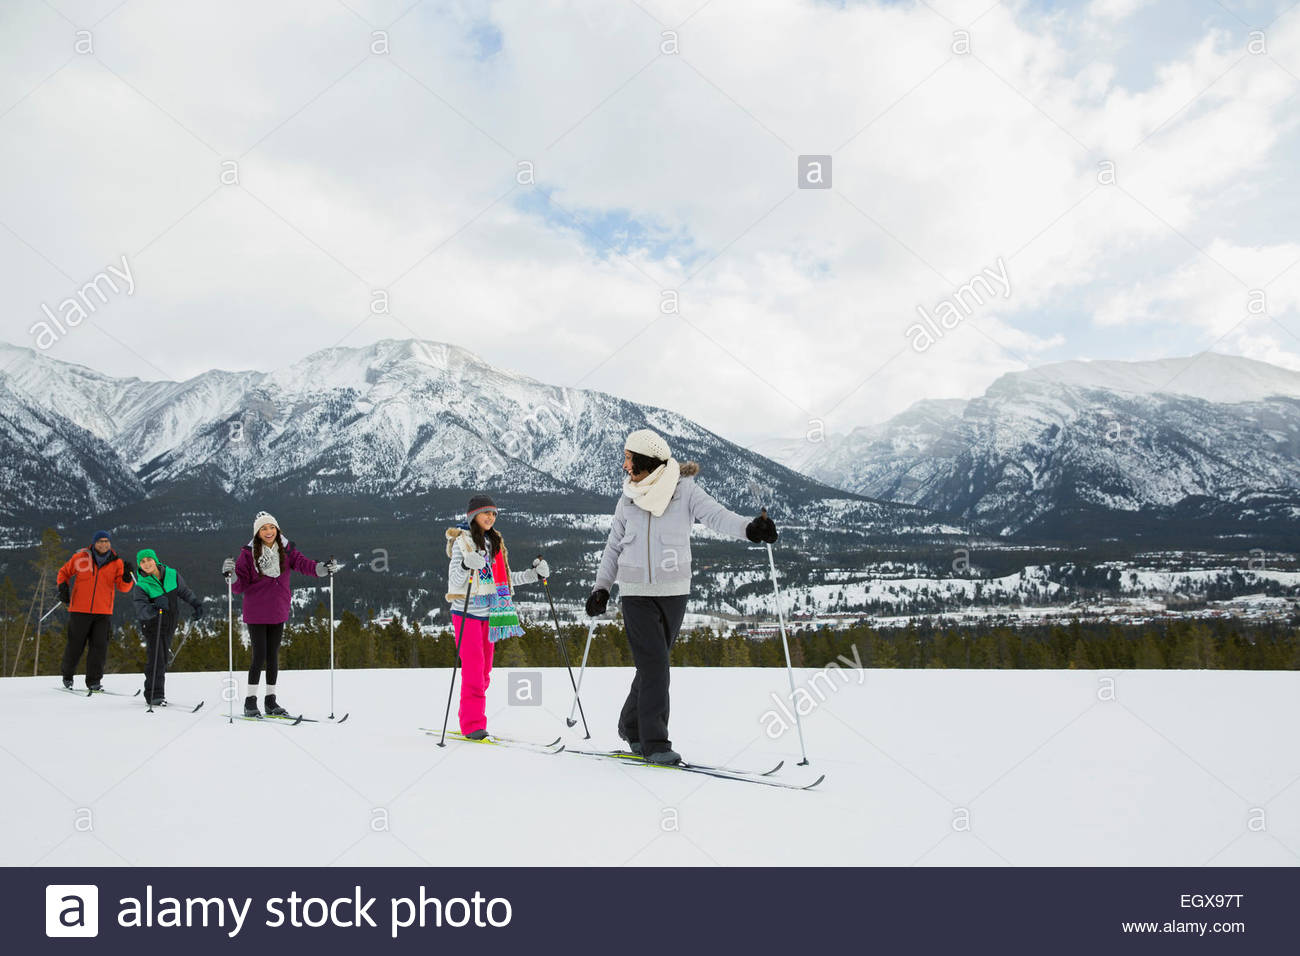 Family cross-country skiing in snowy field Stock Photo